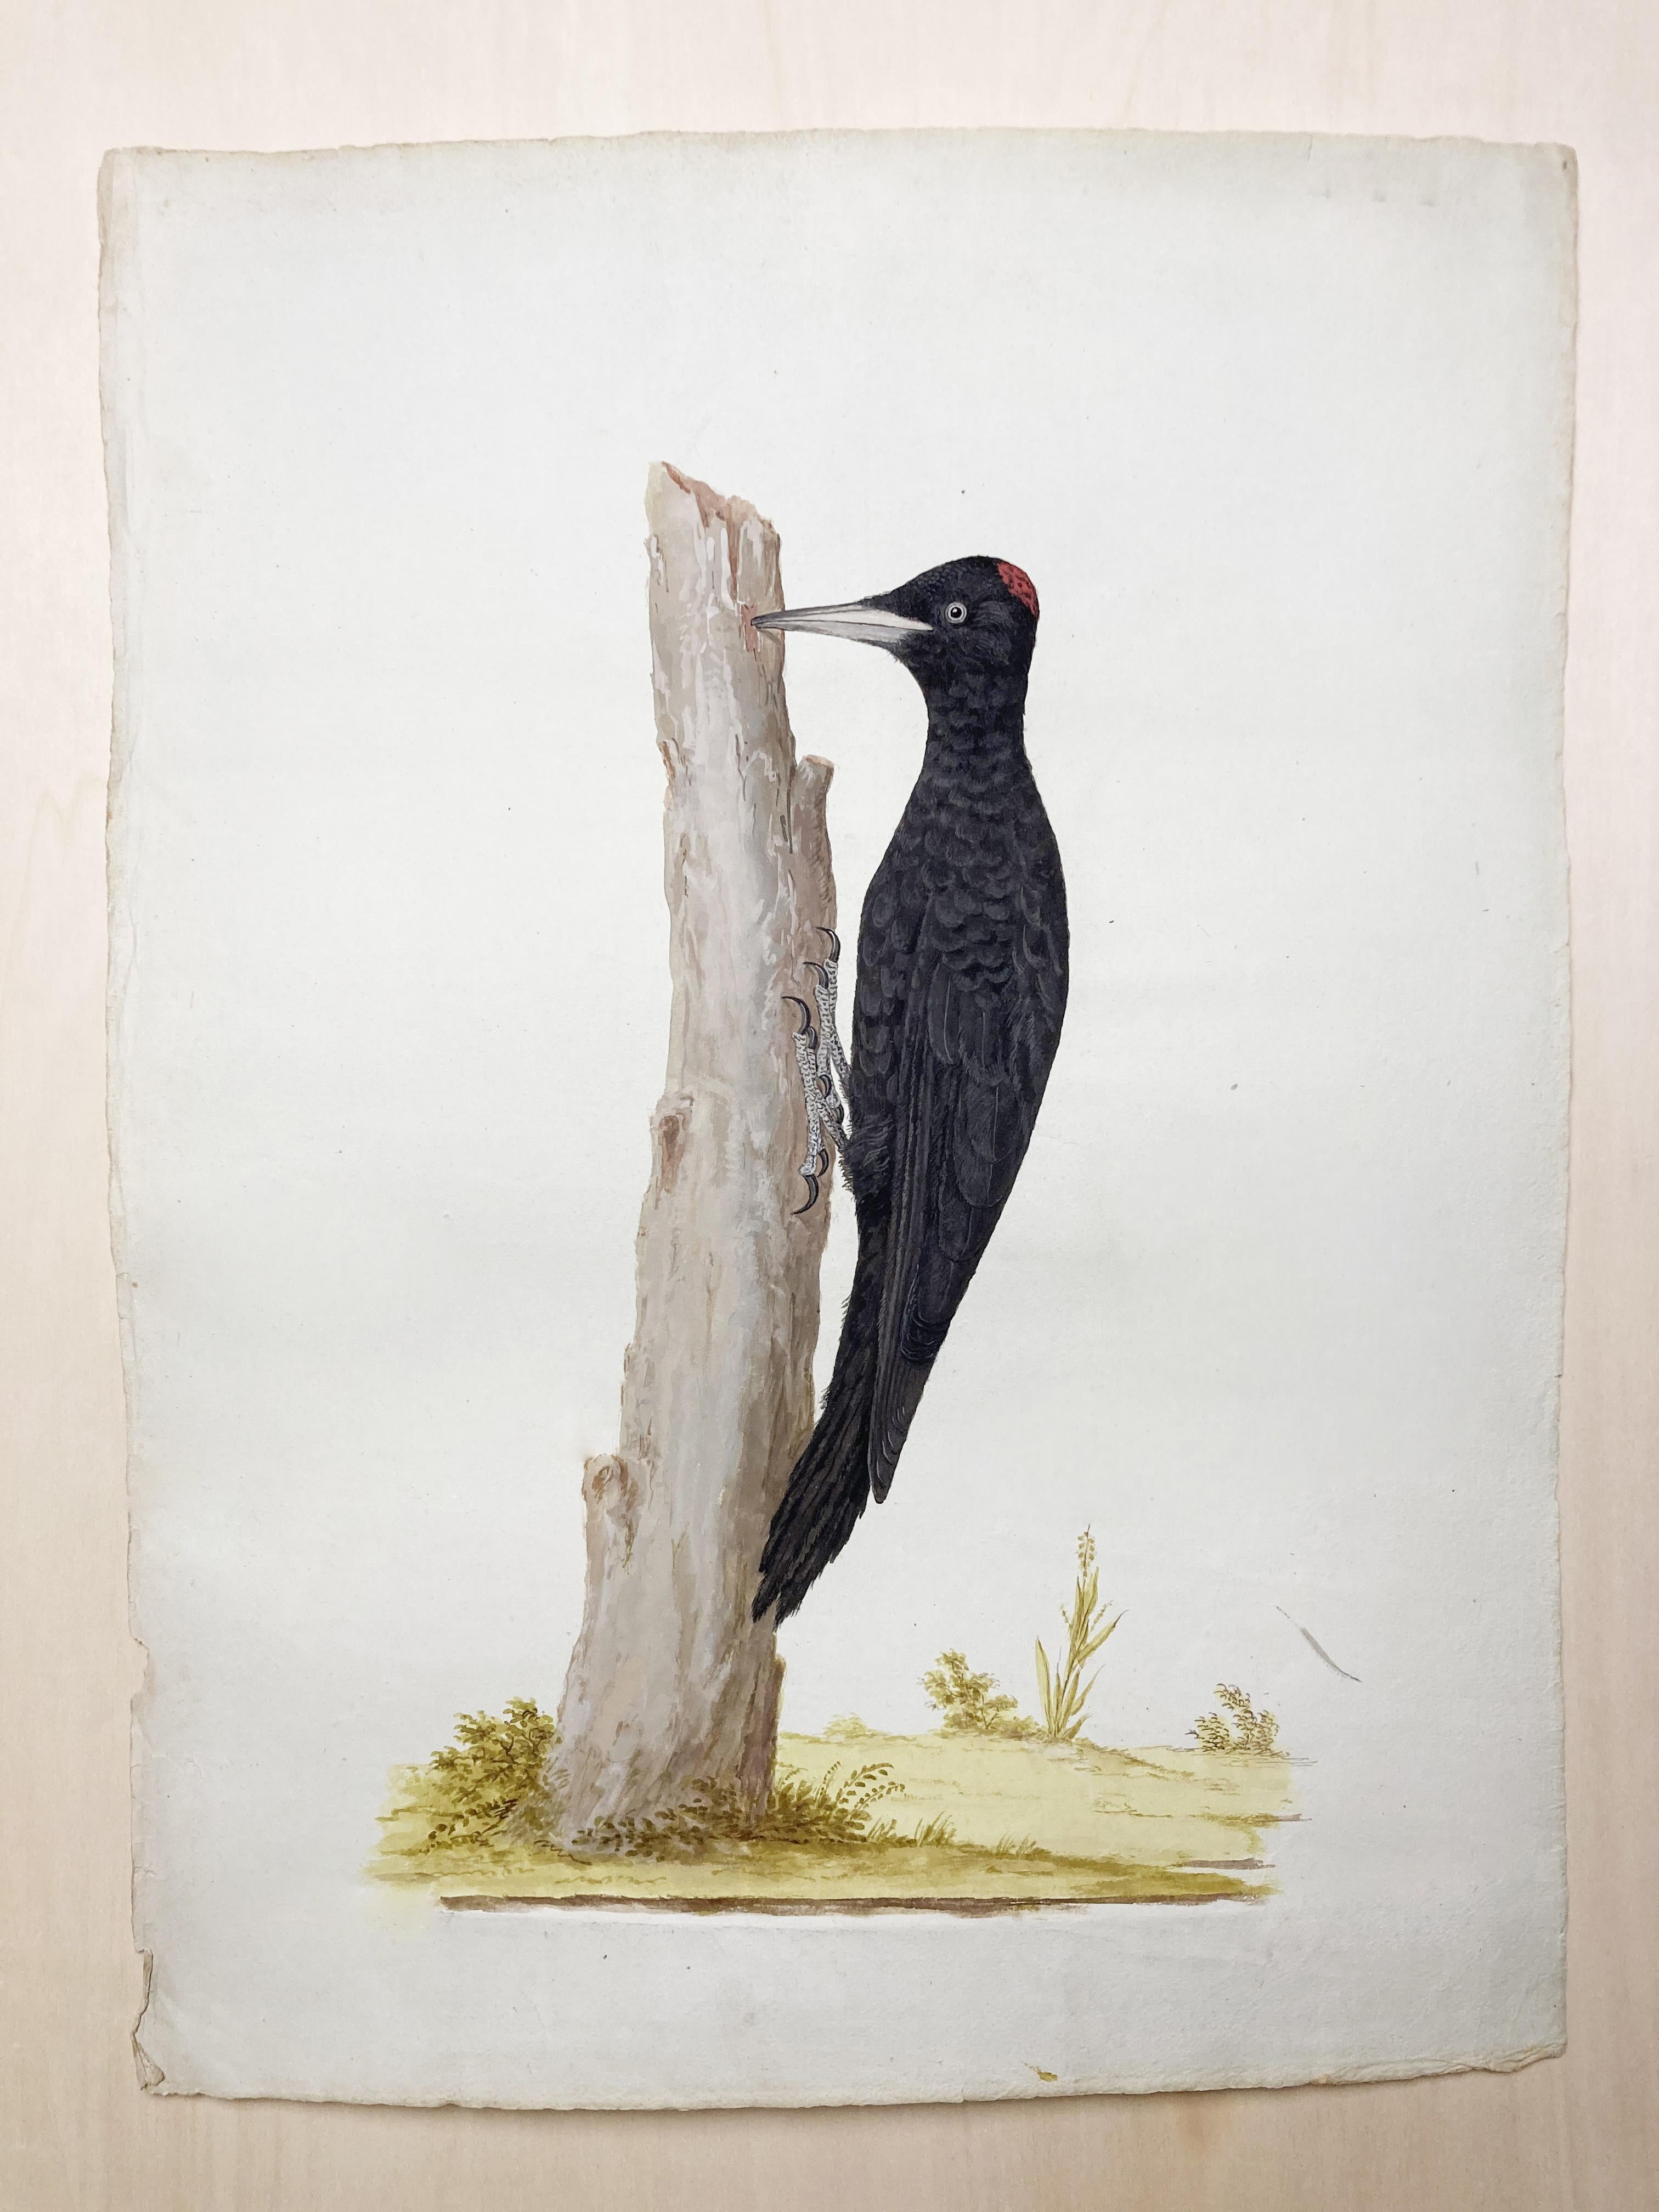 Peter Paillou Animal Art - Bird painting of woodpecker of black and red by enlightened painter